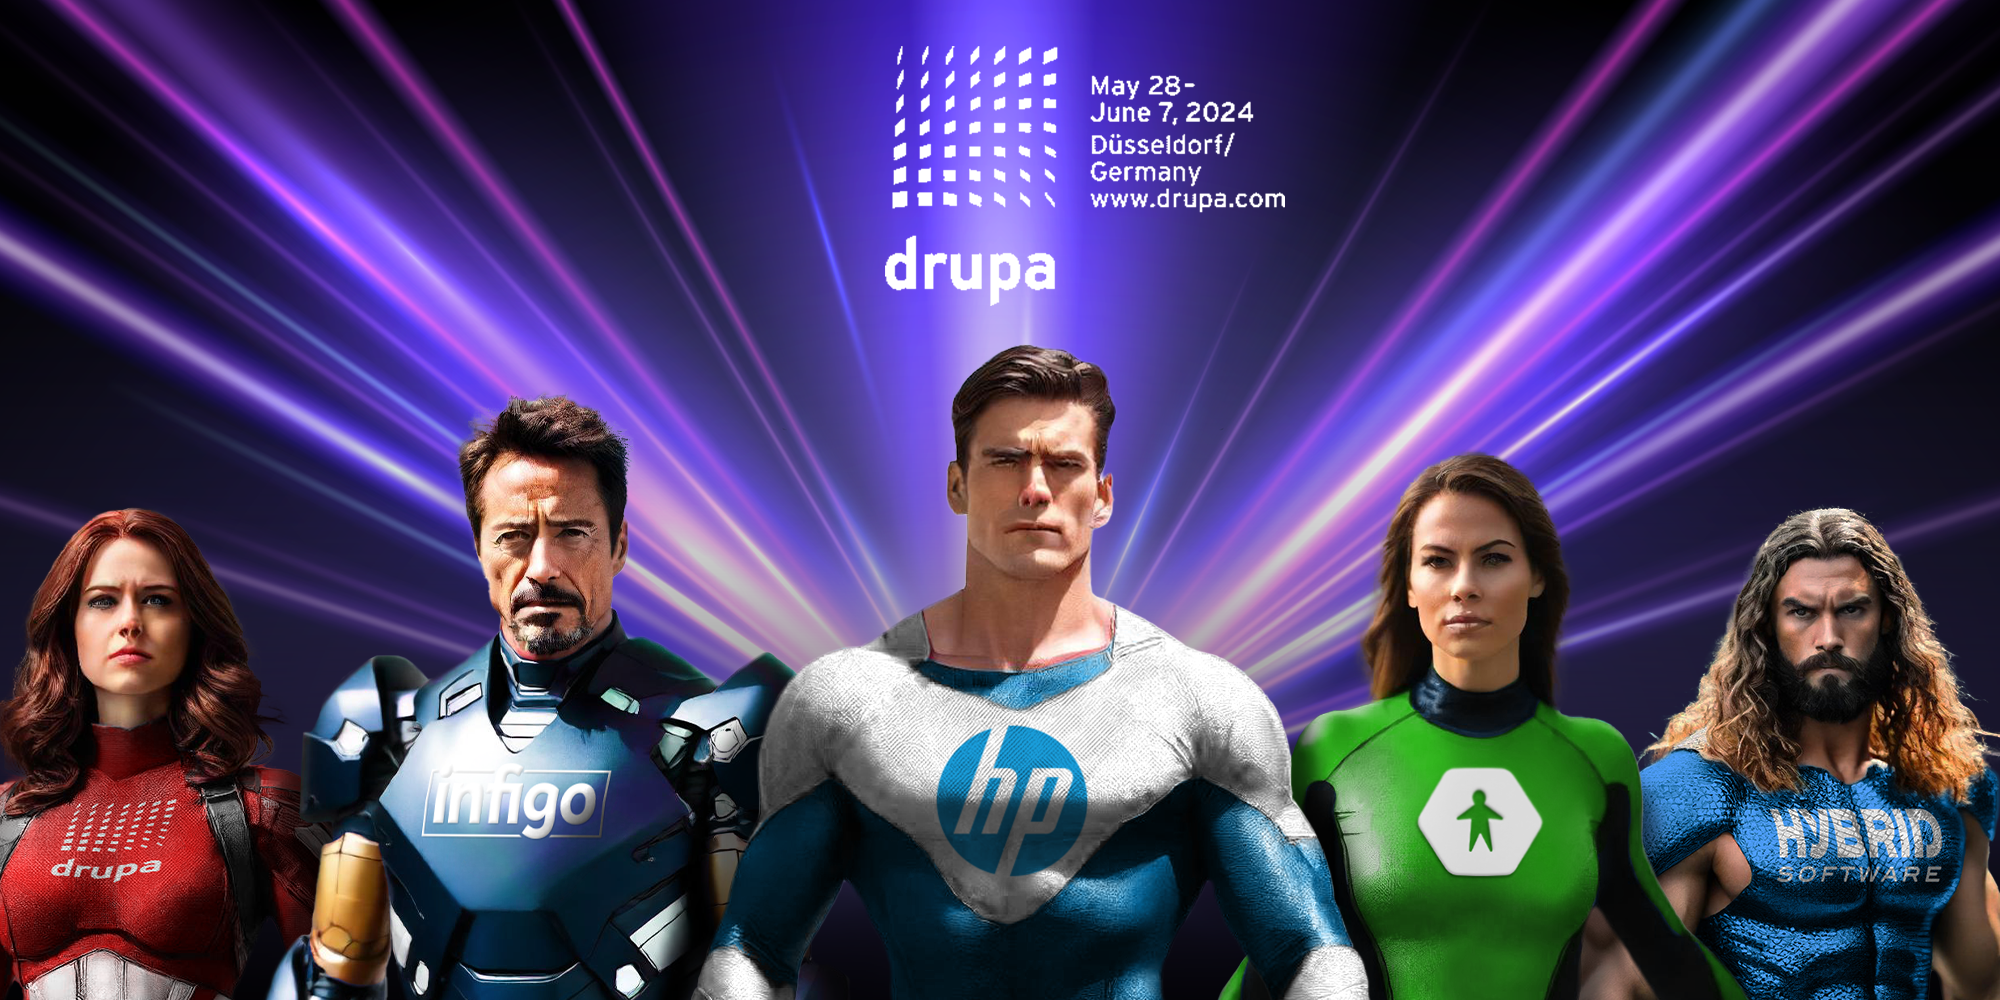 Infigo & HP demonstrate the power of AI in automated workflows at drupa Düsseldorf, held between 28th May - 7th June, from the Messe Düsseldorf, Germany.